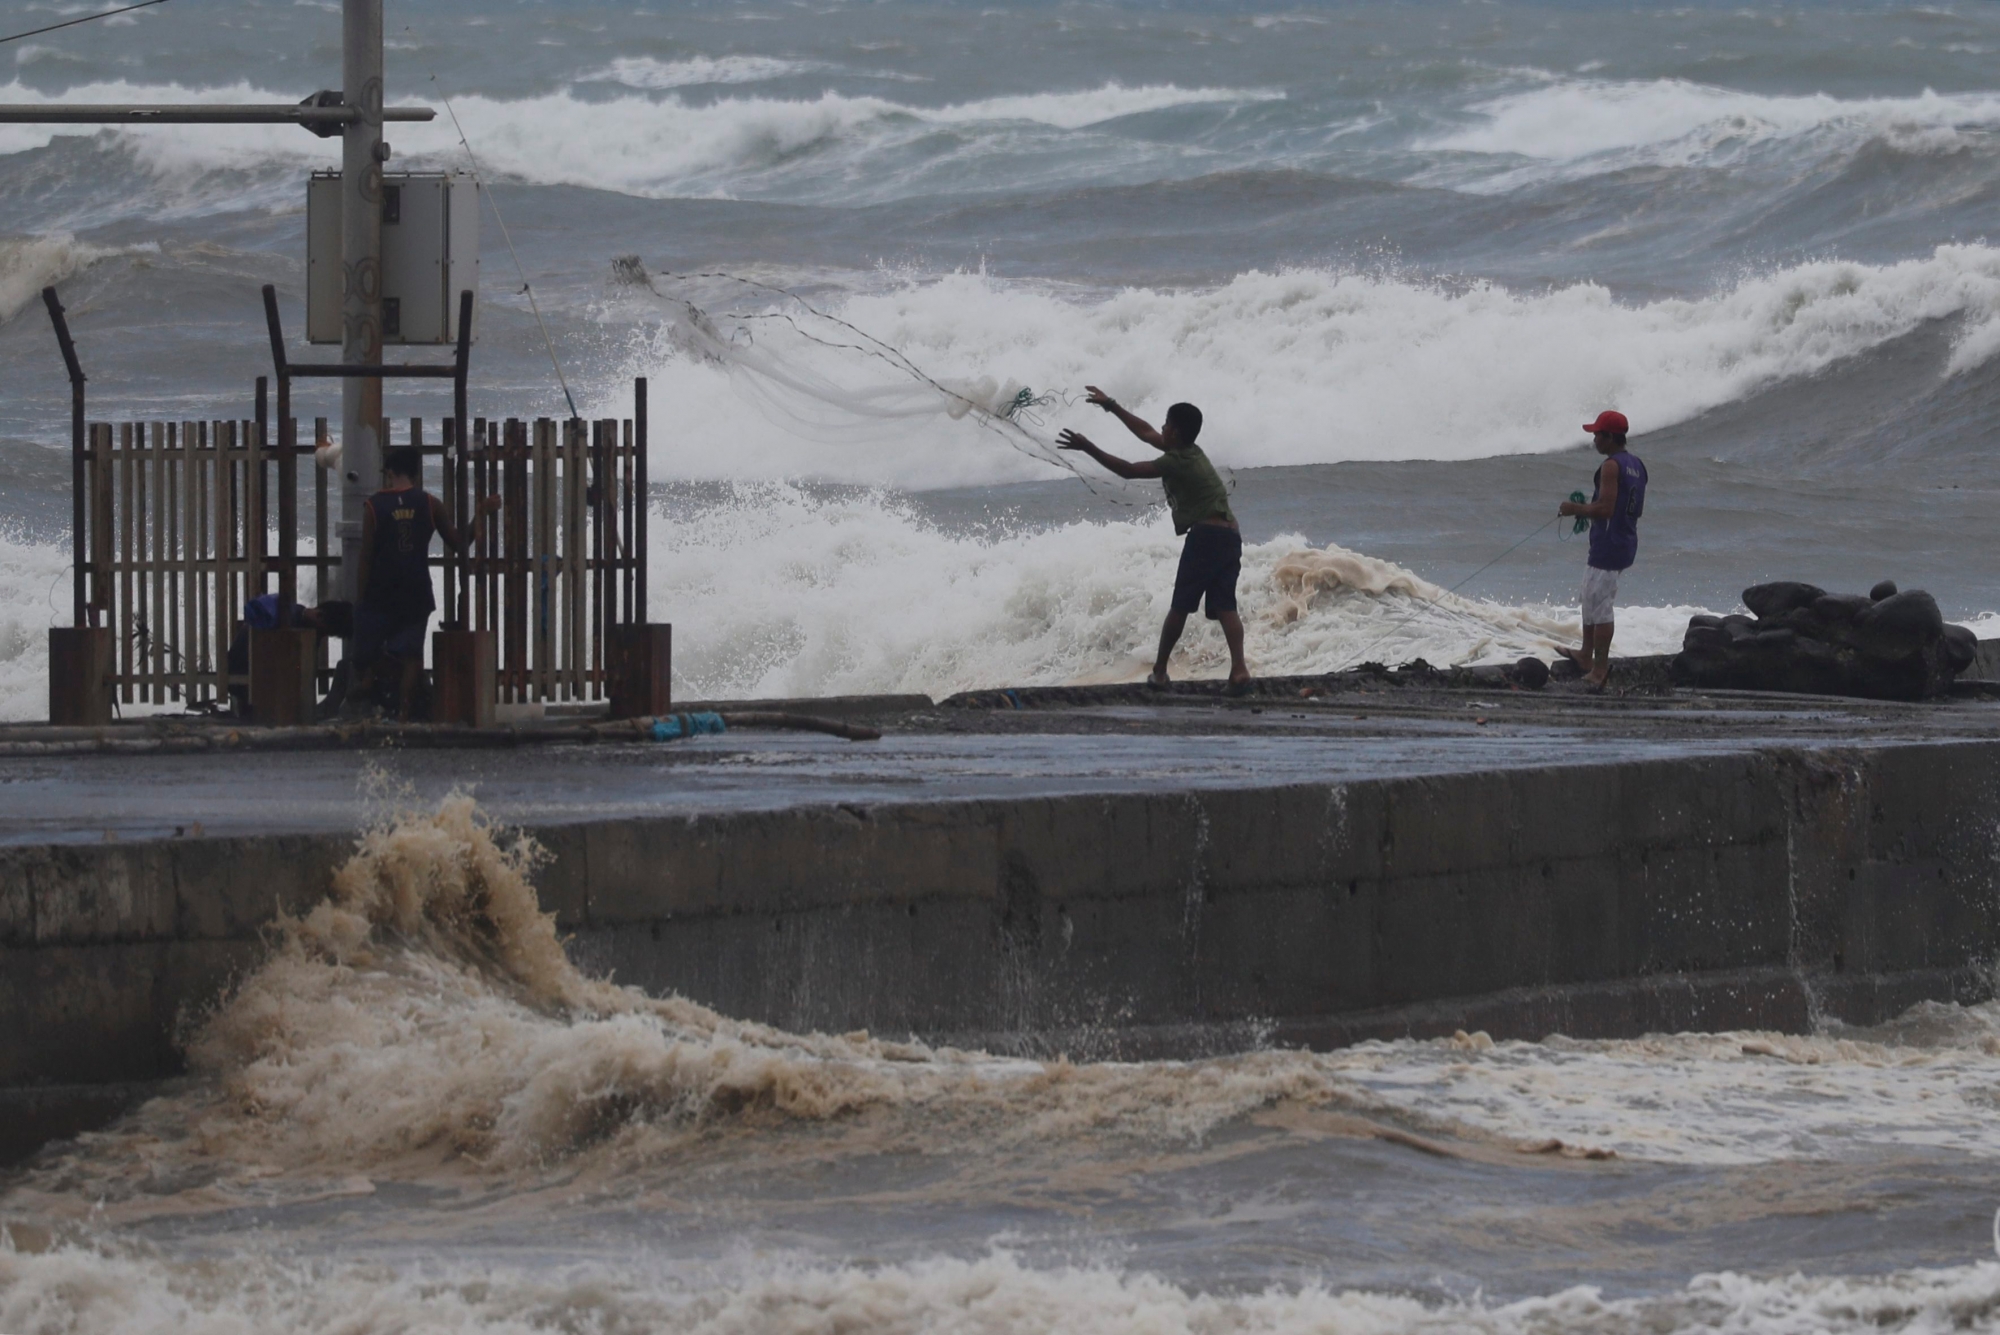 epa07018724 Filipino fishermen fish near the shoreline in the town of Aparri, Cagayan province, Philippines, 14 September 2018. Typhoon Mangkhut, ranked as the most powerful of the year to enter the Philippines braces for the arrival of the storm that is expected to hit the northern island of Luzon. The category 5 typhoon, Mangkhut, named Ompong in the Philippines, is moving with sustained winds of 205 km per hour (127 mph) and gusts of 255 km per hour off the eastern coast of Luzon, according to the Philippine meteorological service Philippine Atmospheric, Geophysical and Astronomical Services Administration (PAGASA).  EPA/FRANCIS R. MALASIG PHILIPPINES WEATHER SUPER TYPHOON MANGKHUT